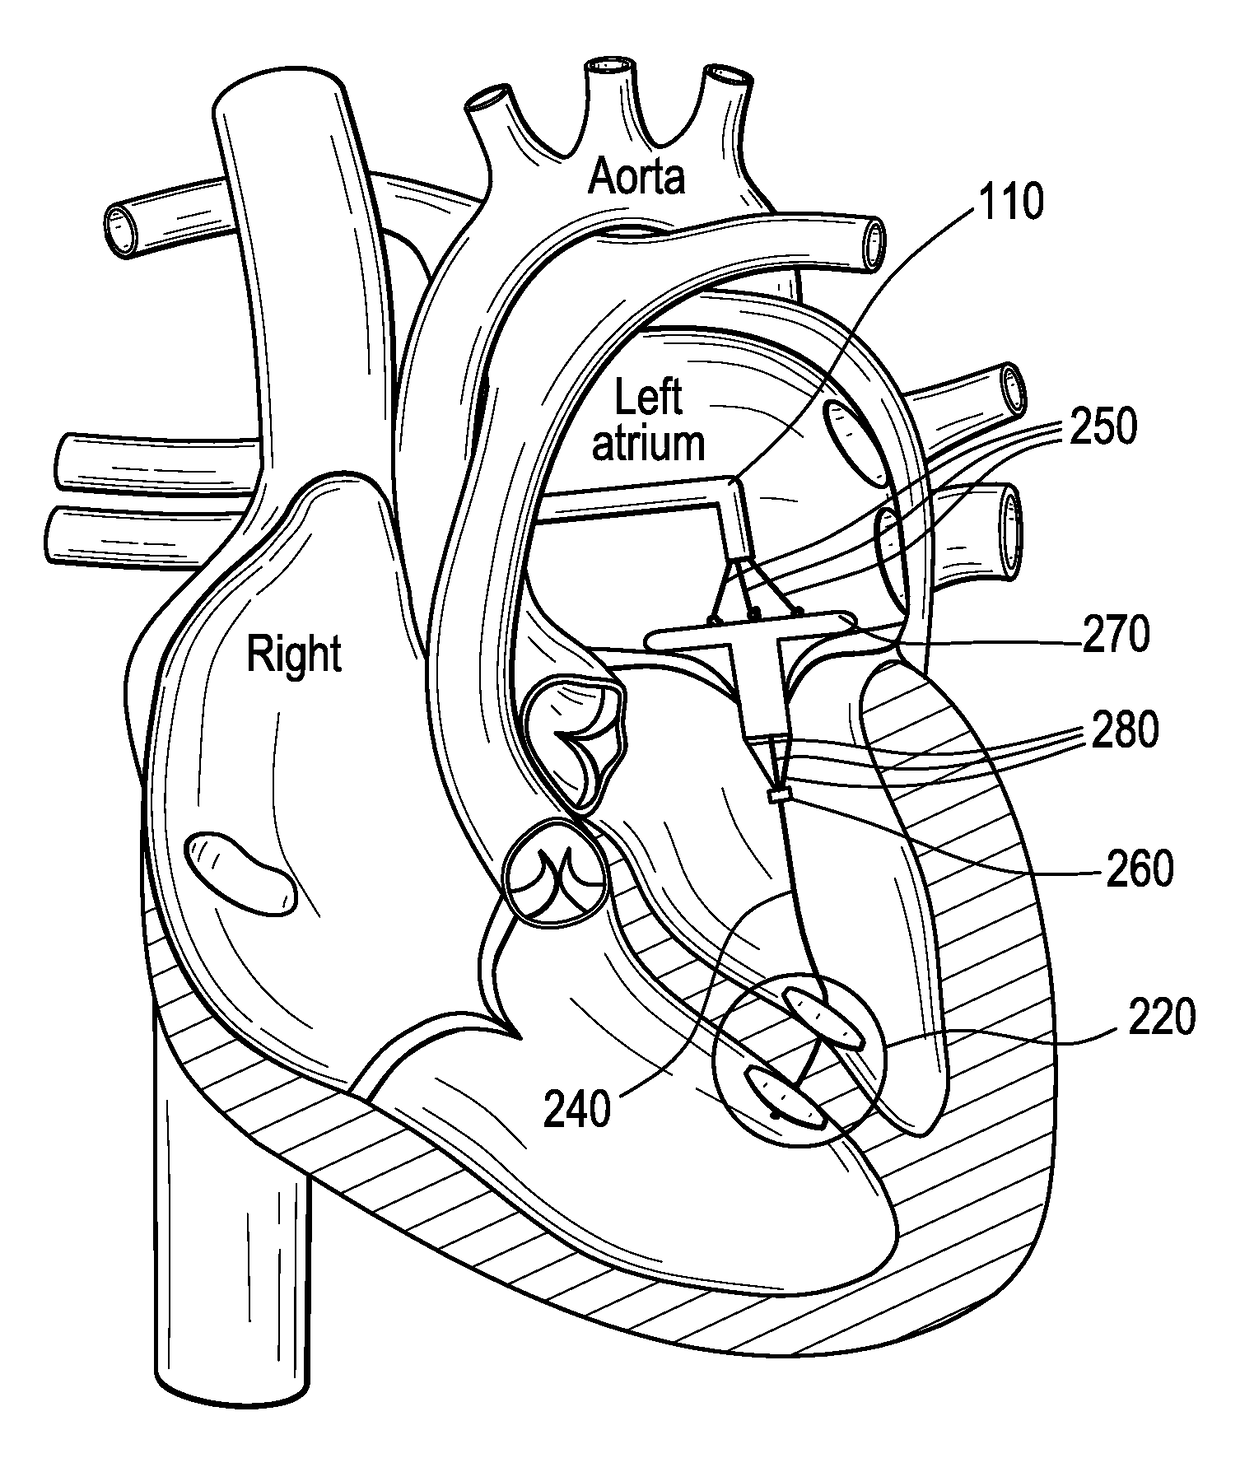 Delivery systems and methods for transcatheter prosthetic valves